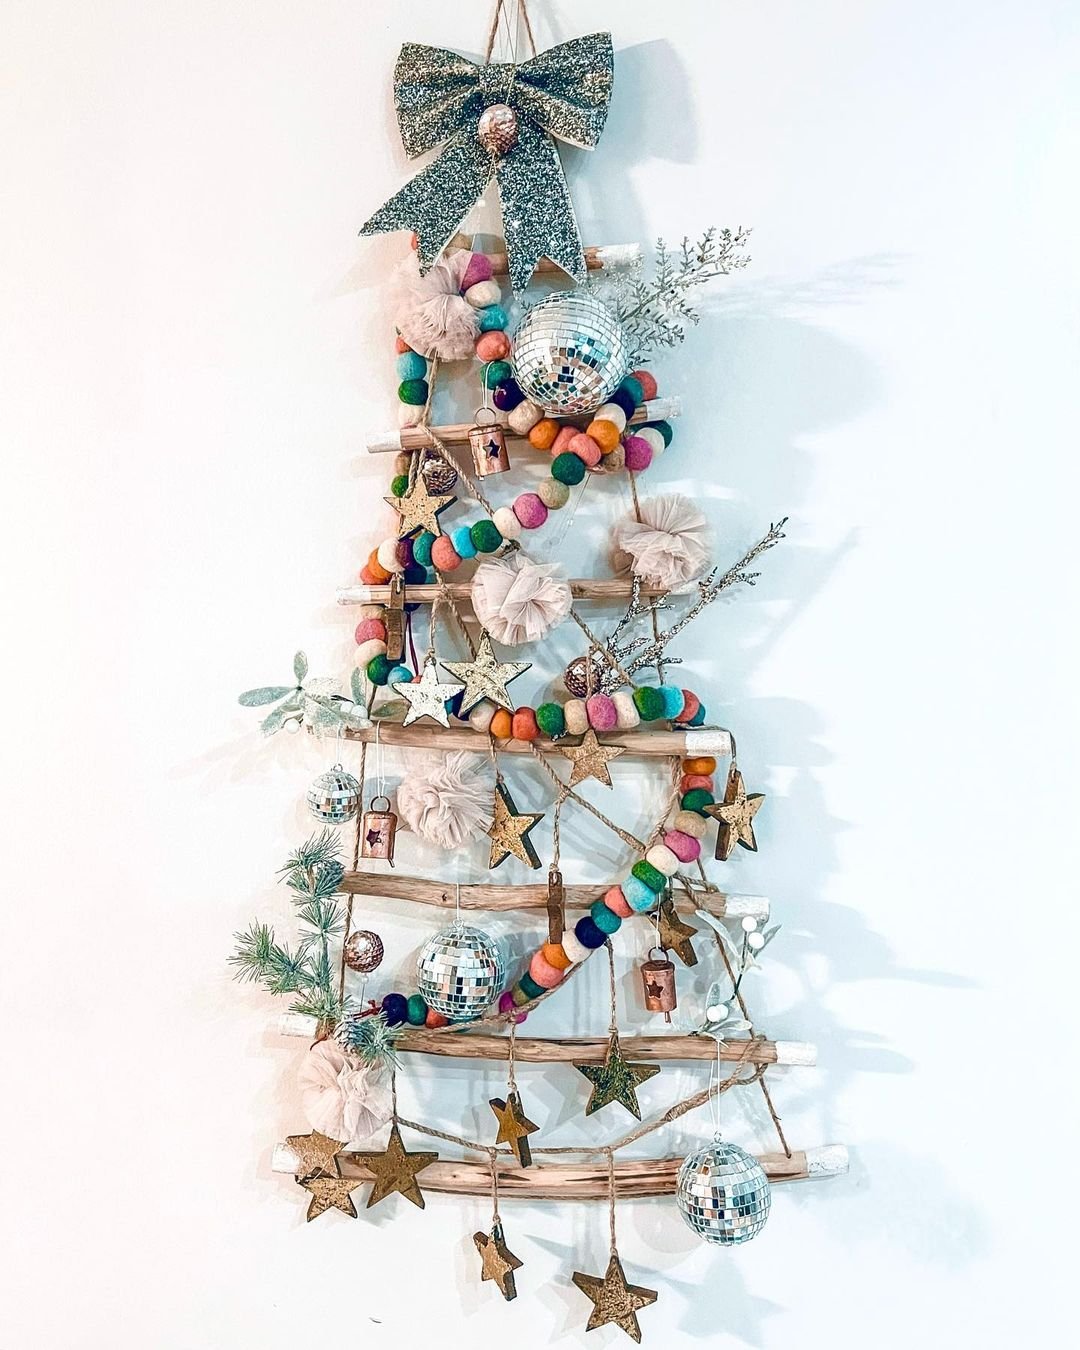 Wall-mounted wooden Christmas tree adorned with colorful ornaments.